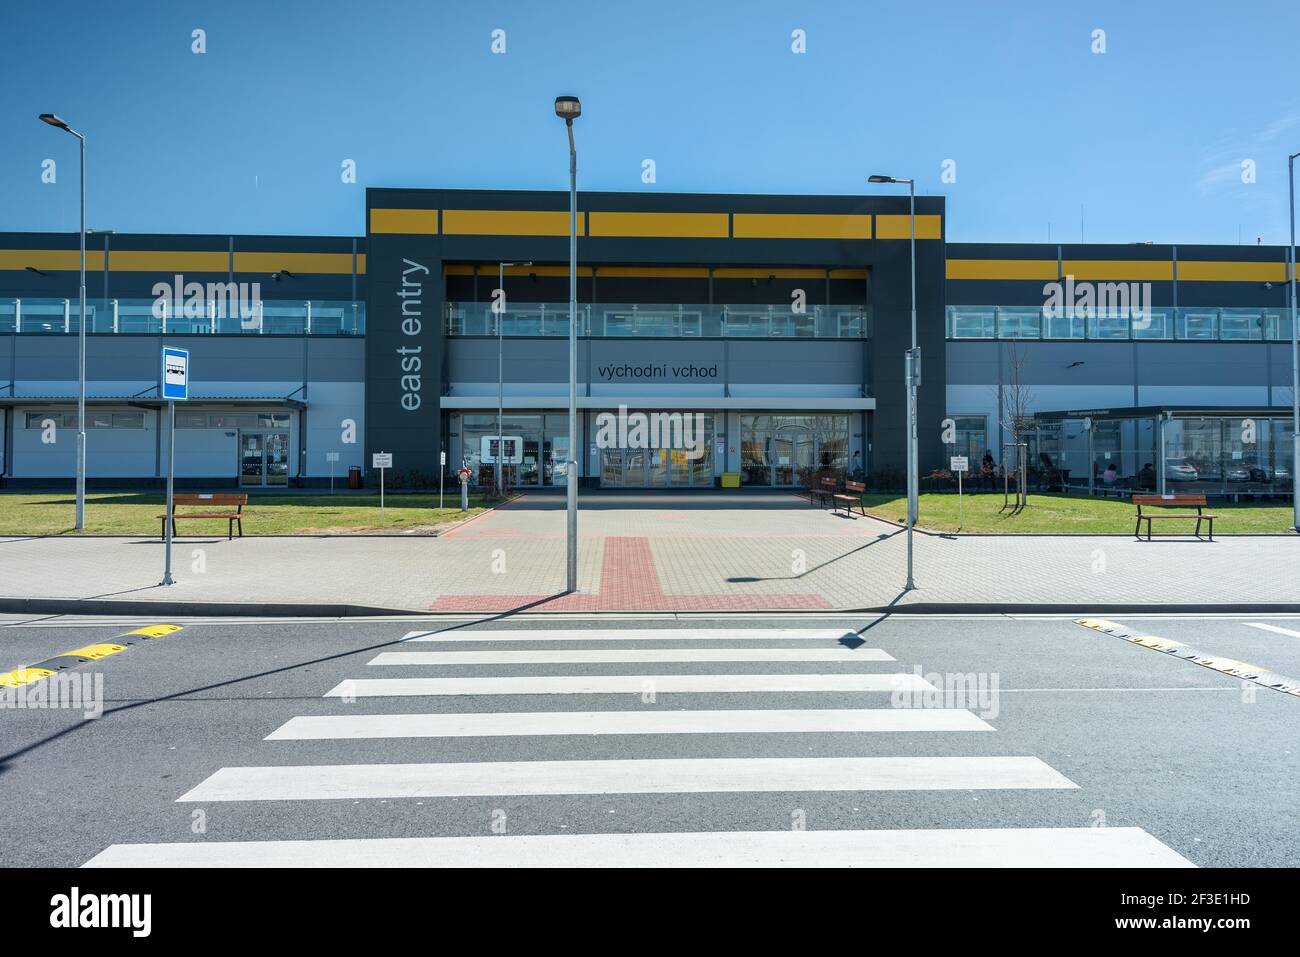 Beautiful Aerial view of an Amazon logistics / distribution warehouse or center. Colorful and scenic industrial view Stock Photo